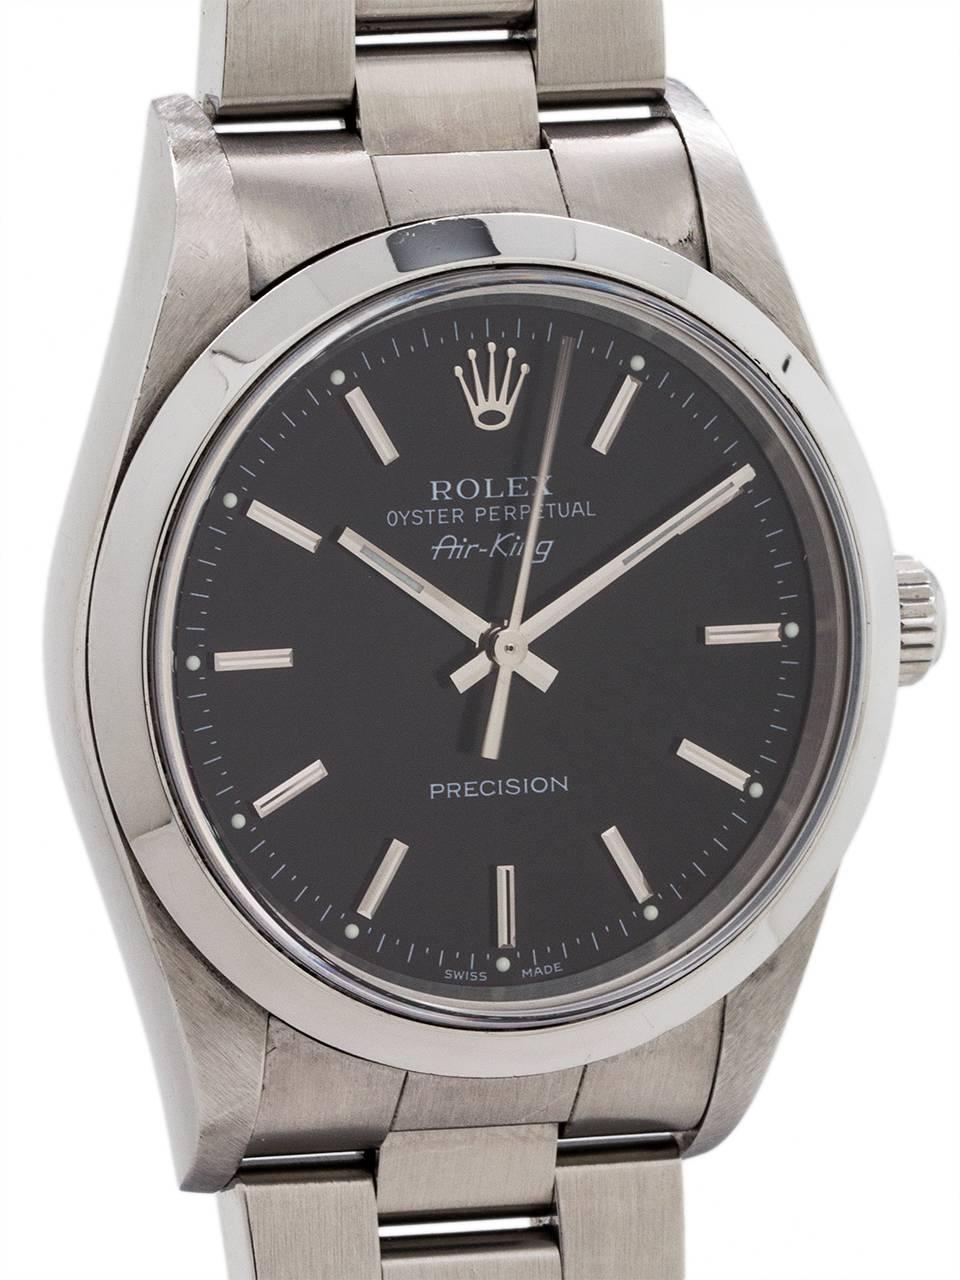 
Rolex Oyster Perpetual Airking ref 14000M serial# D6 circa 2005. 34mm diameter case with smooth bezel and sapphire crystal and glossy black original dial with applied silver indexes with bright glow luminova dots and hands. Powered by self winding